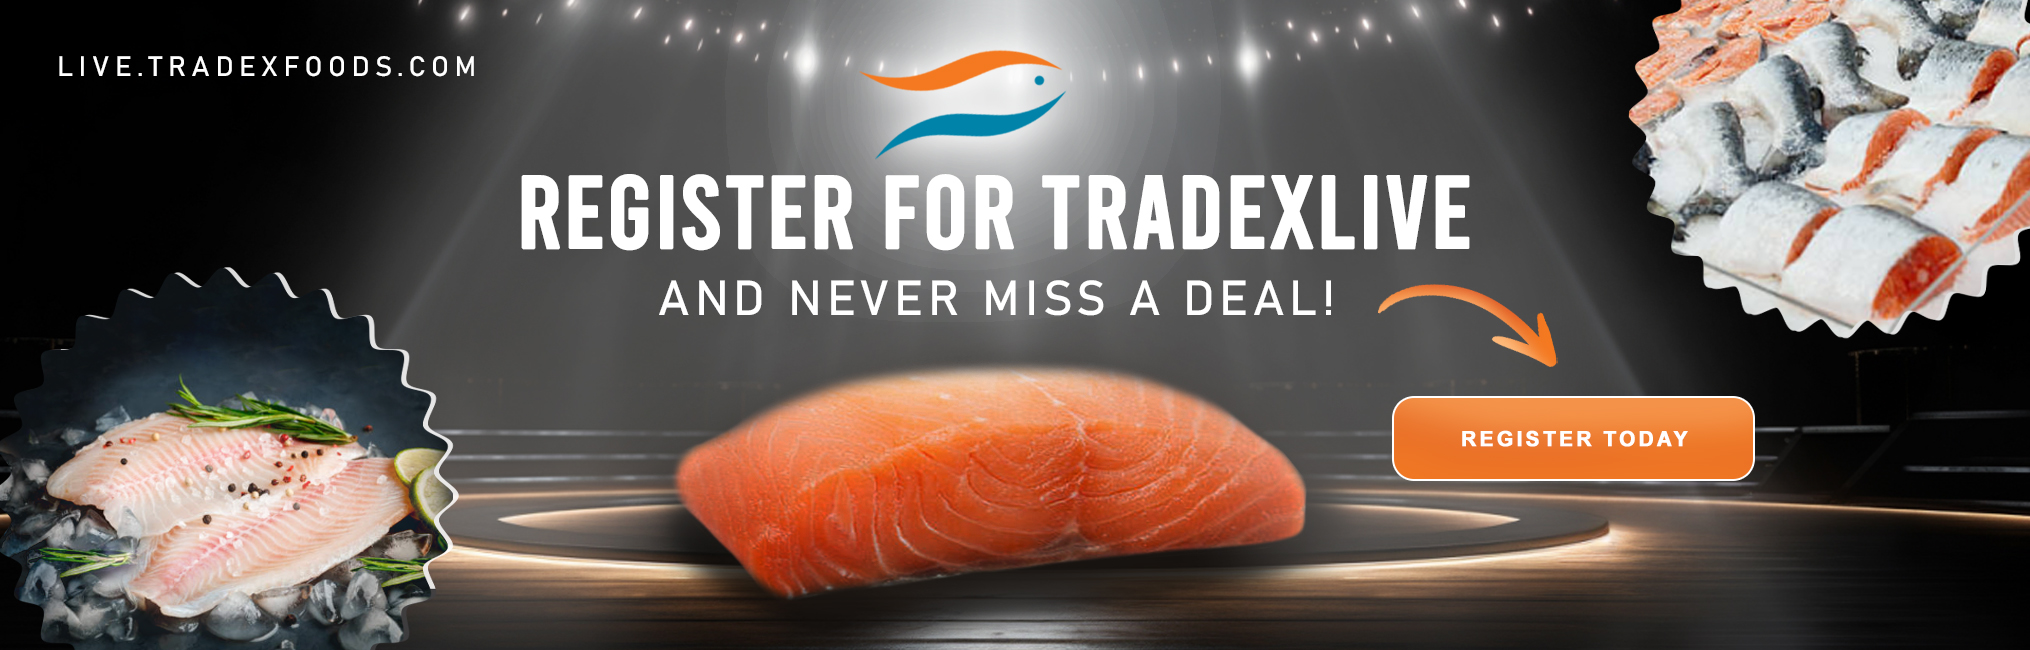 Register for TradexLive and never miss a deal!